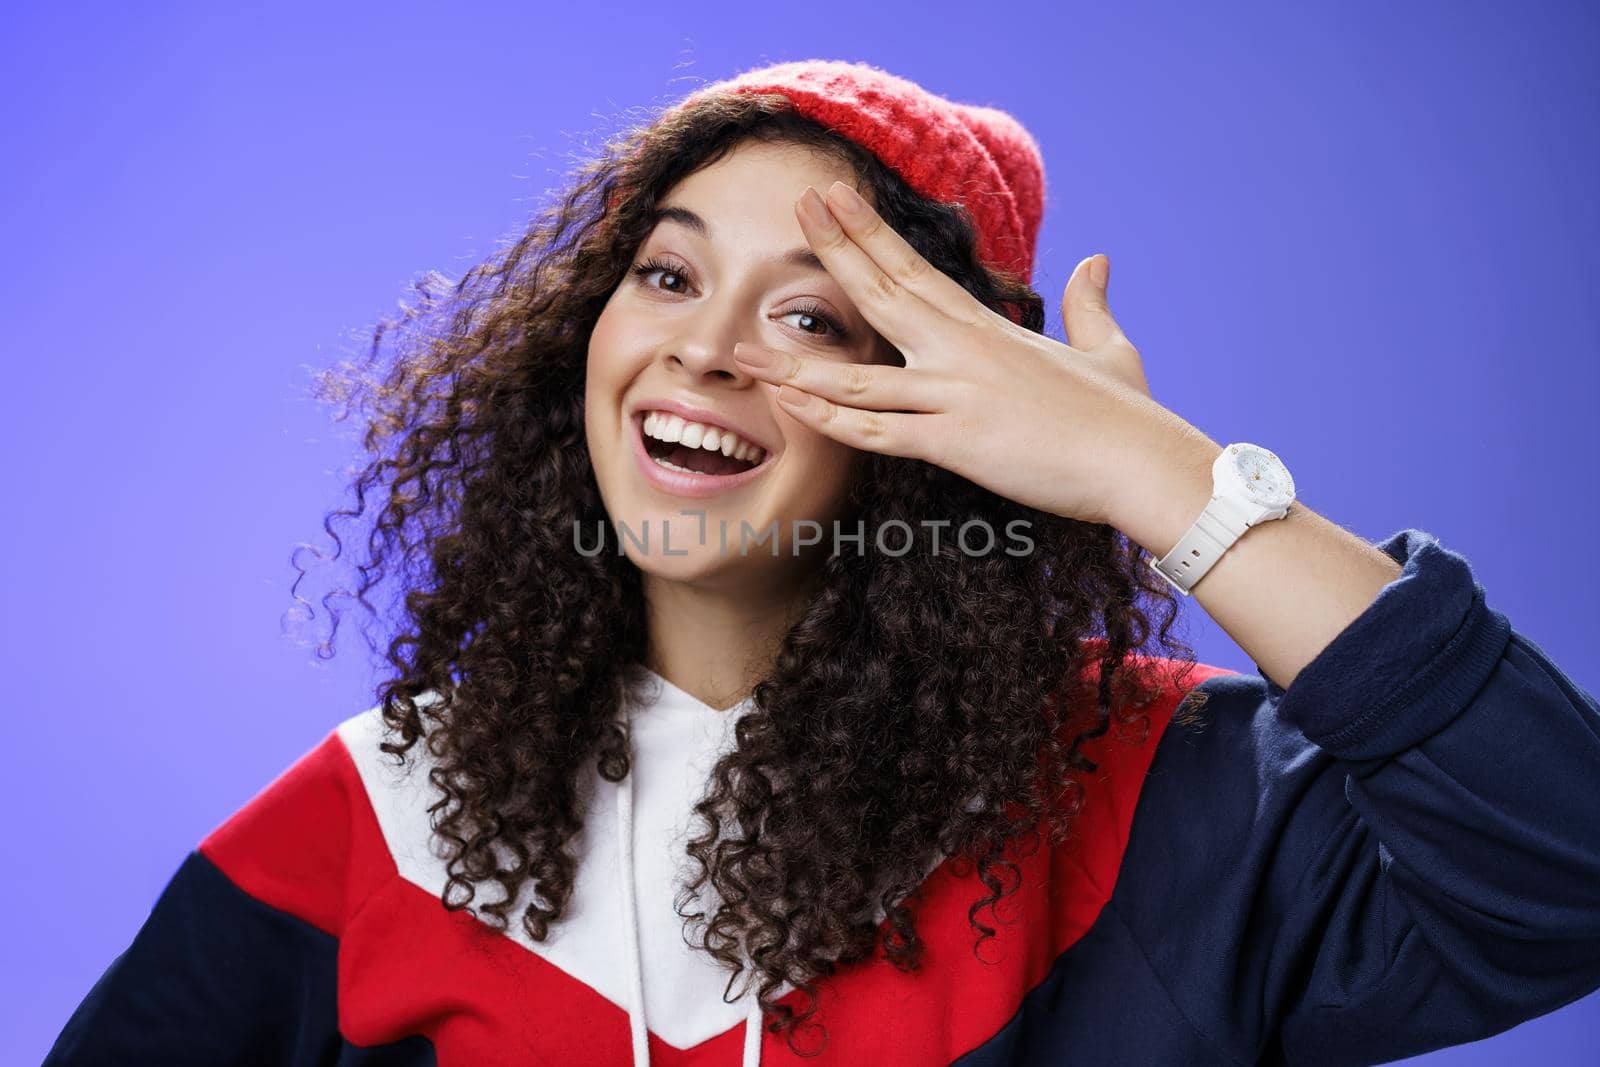 Close-up shot of charismatic happy carefree woman in winter red cute beanie and sweatshirt holding fingers near eye and peeking with broad smile at camera having fun, playing over blue background.